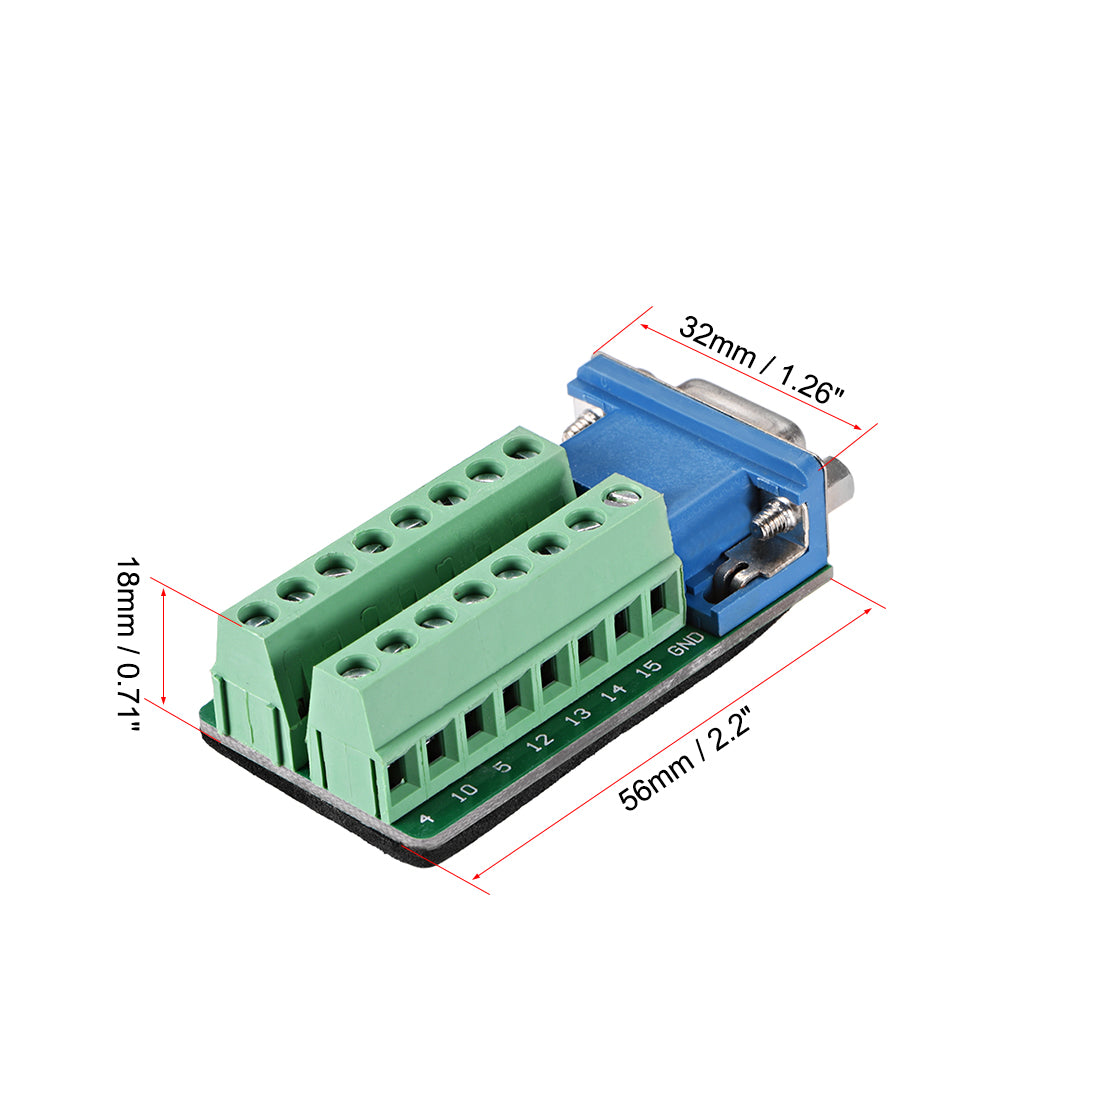 uxcell Uxcell D-sub DB15 Breakout Board Connector 15 Pin 3-row Female Port Solderless Terminal Block Adapter with Positioning Nuts